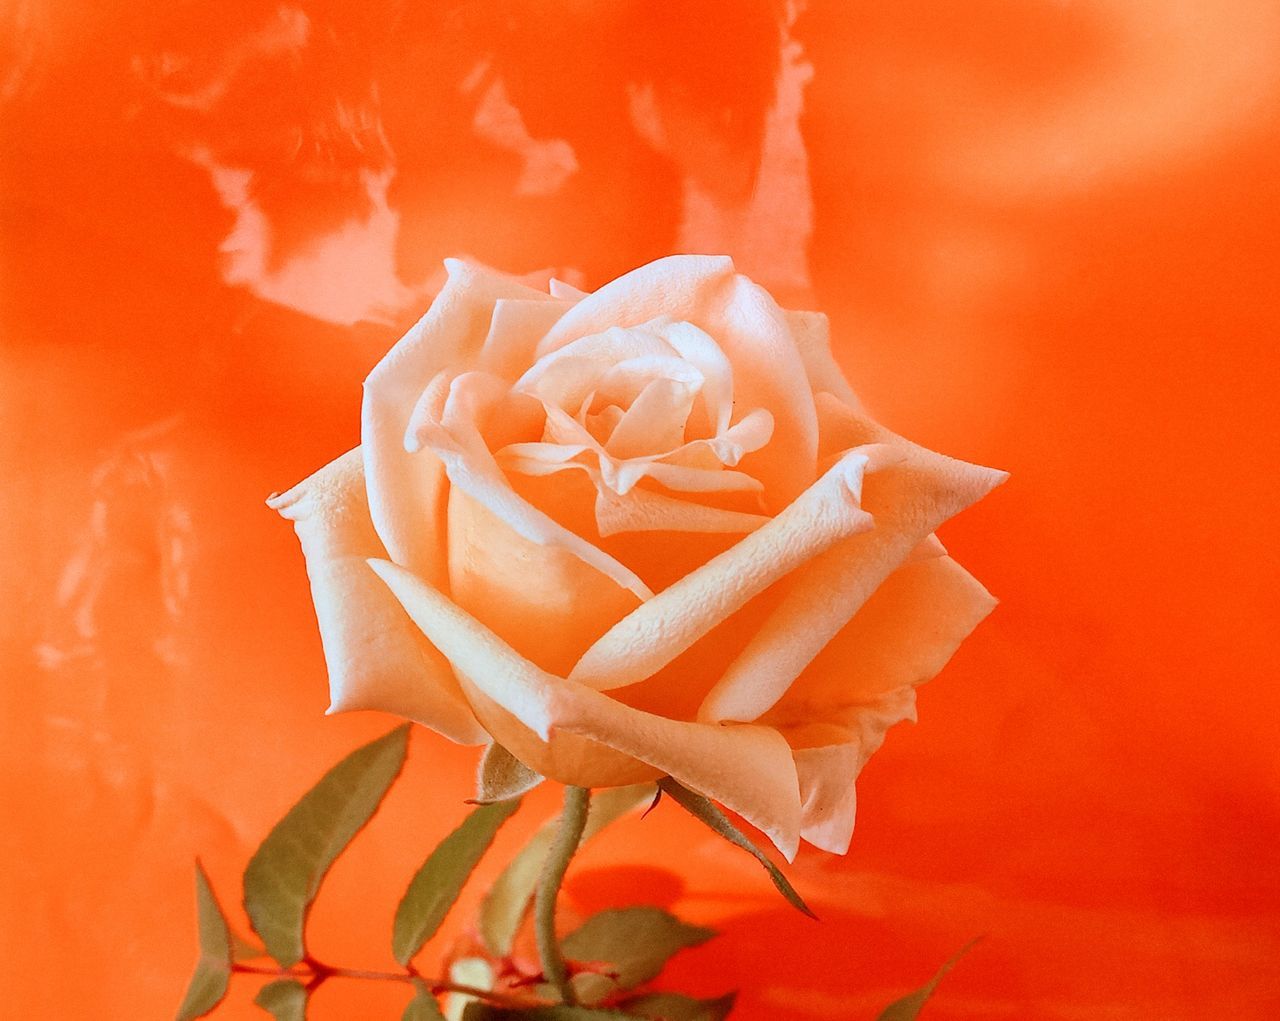 fiery rose Beacon Fire Ball Shimmering In Gay Abundance Pinnacle Storming Lucky Orange Color Close-up